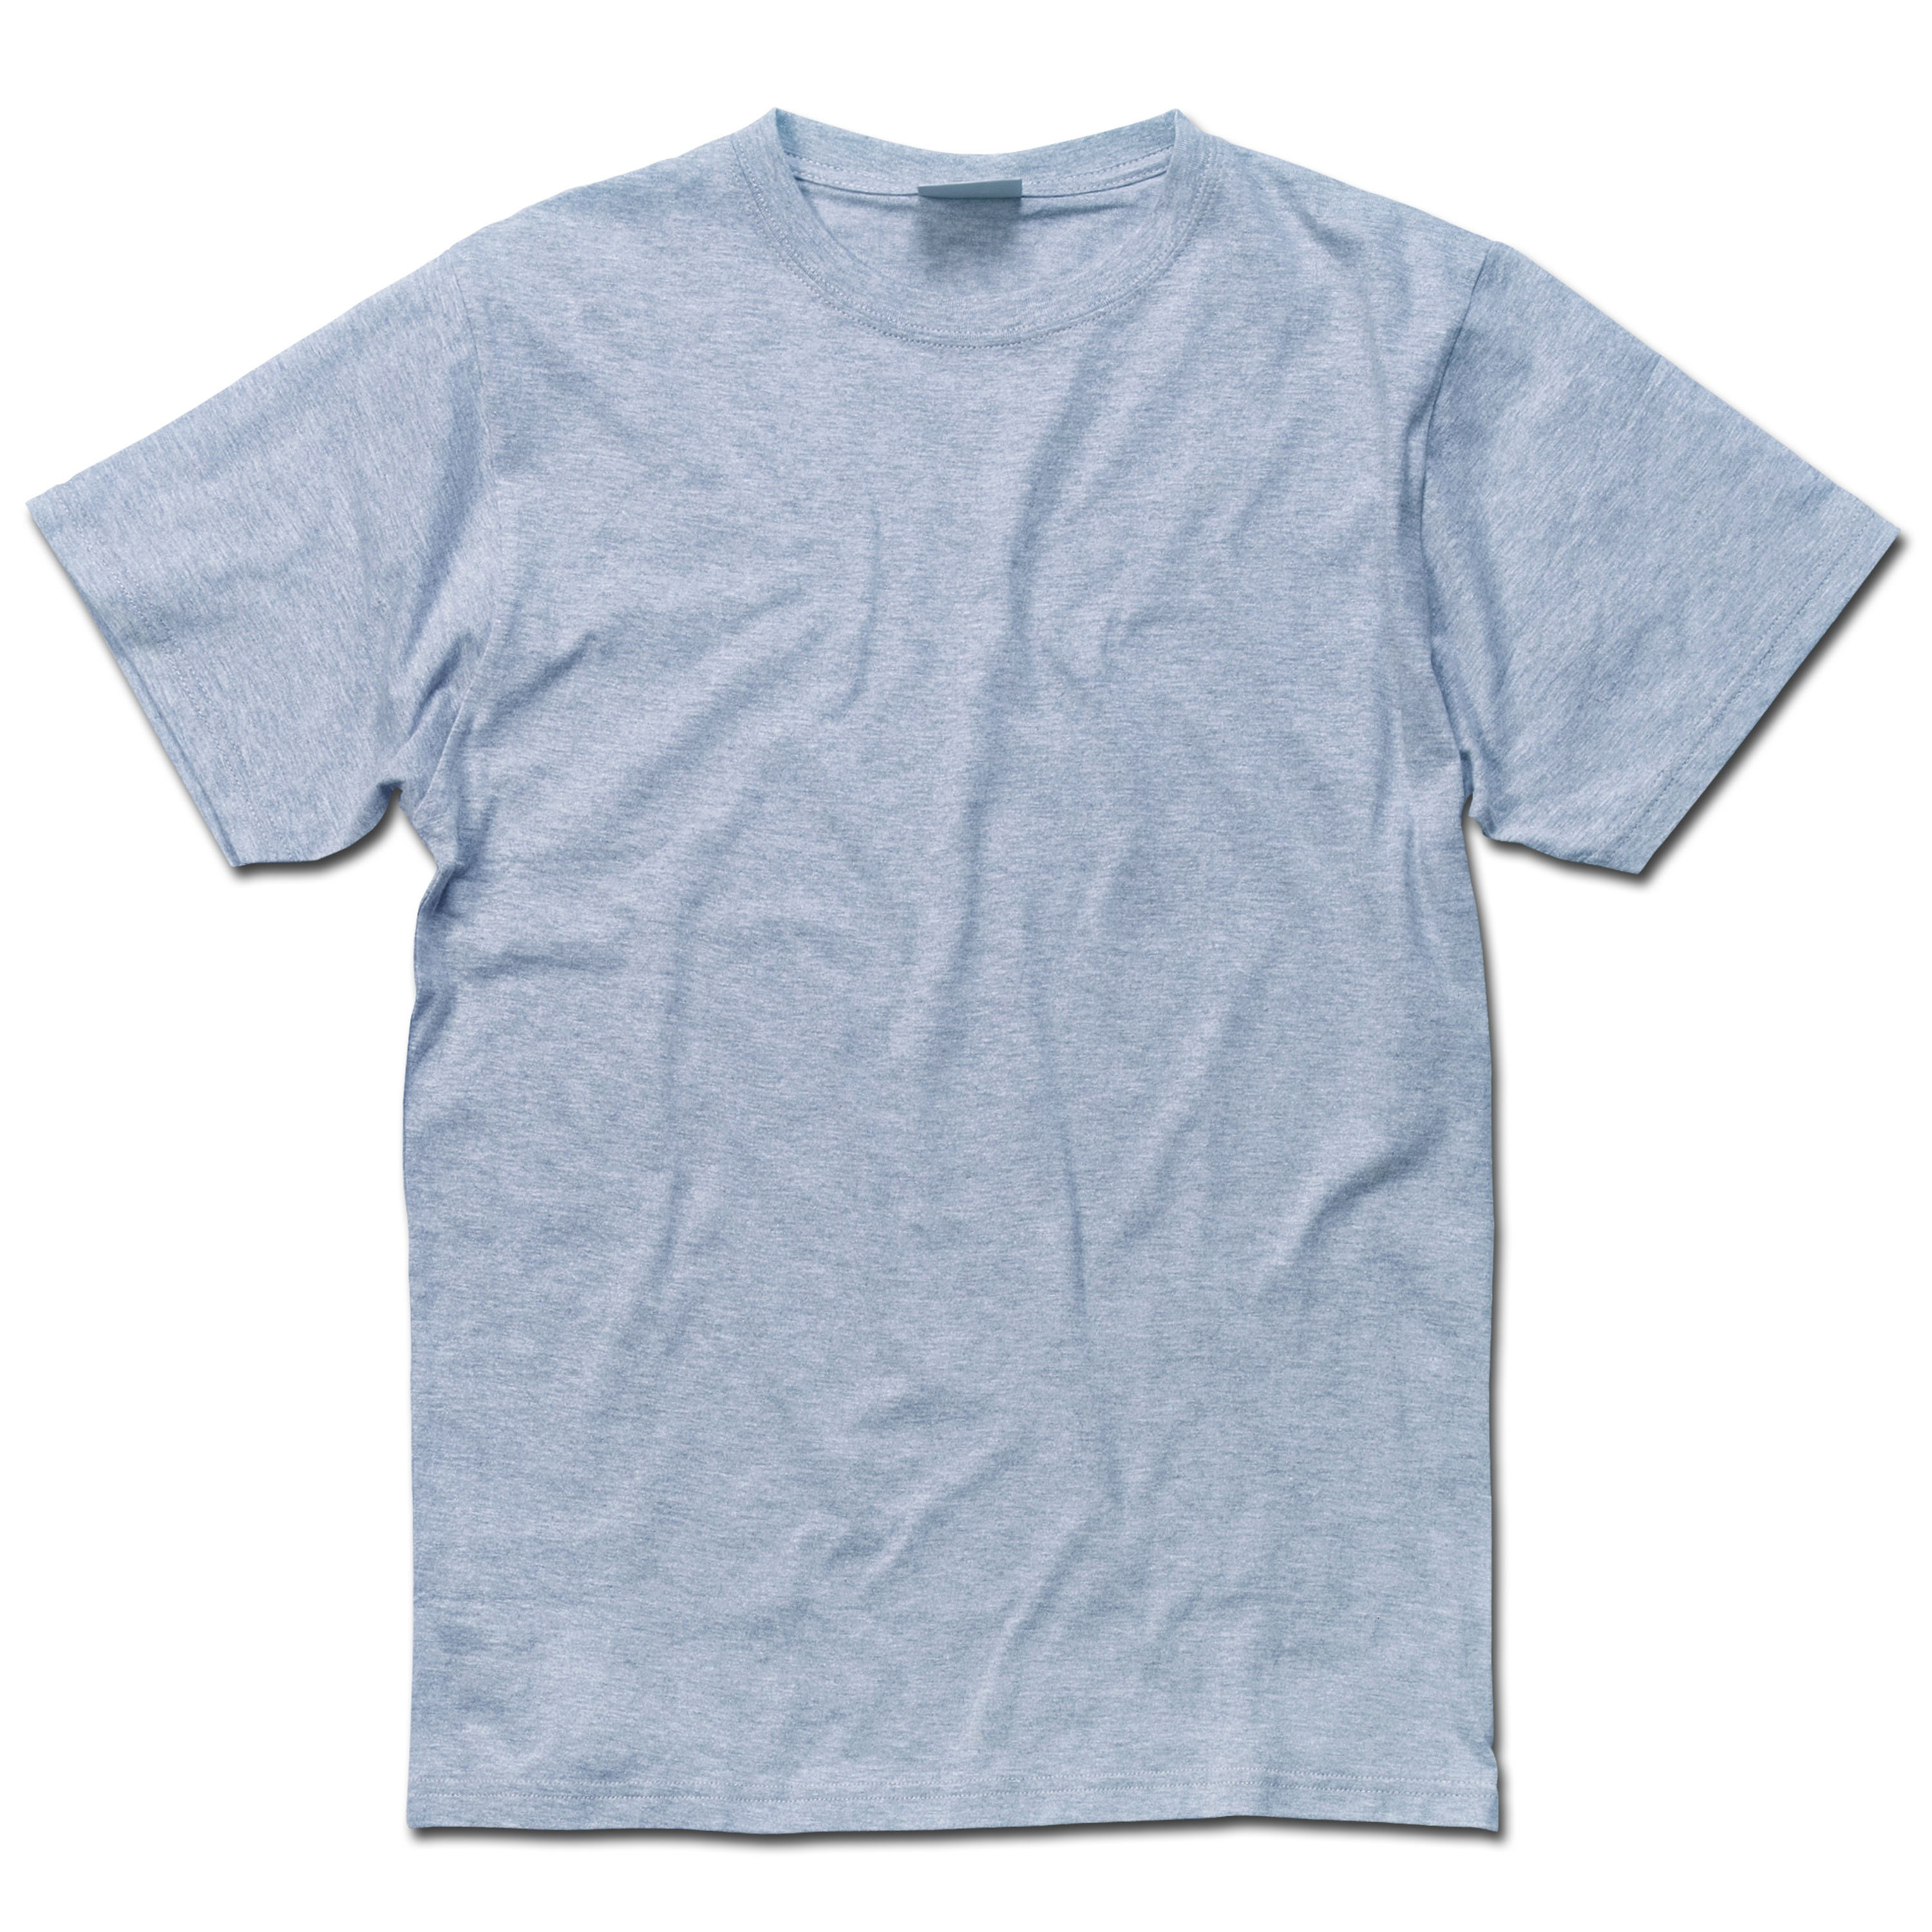 T-Shirt Vintage Industries Wing light-gray | T-Shirt Vintage Industries ...